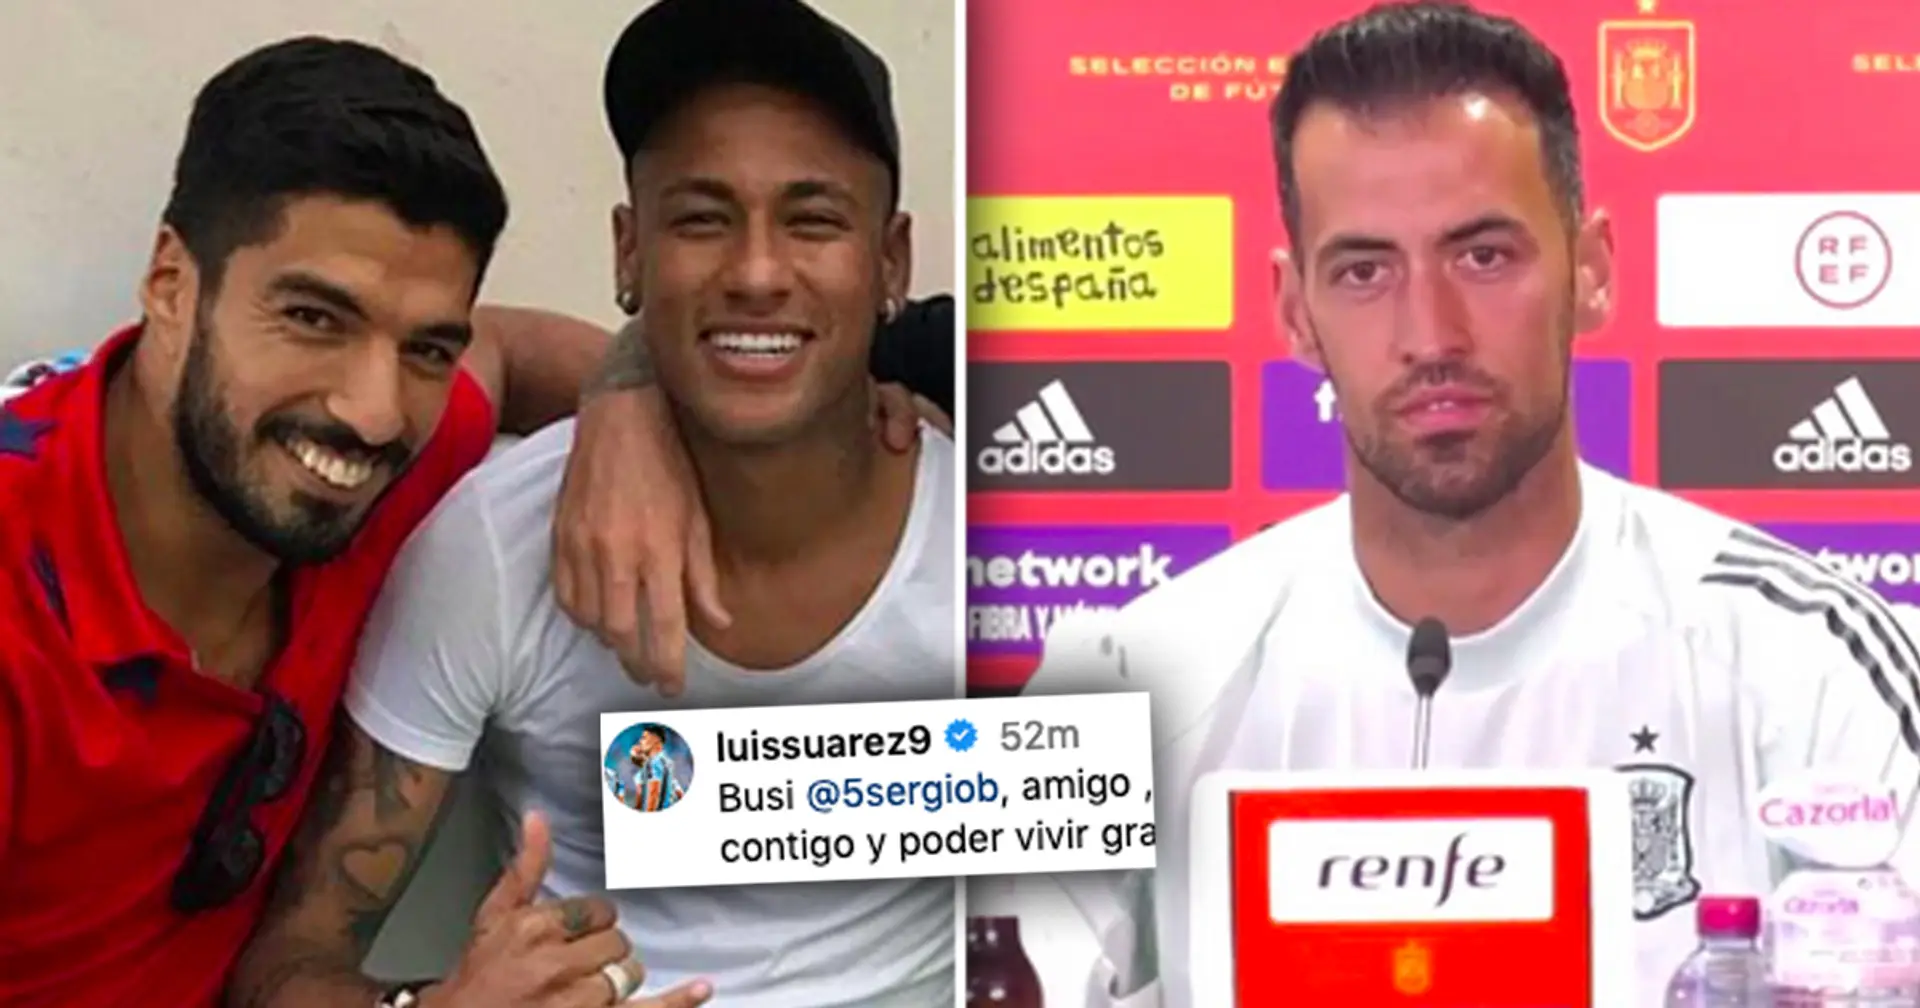 'An example to all of us': Luis Suarez and Neymar pen farewell messages for Busquets